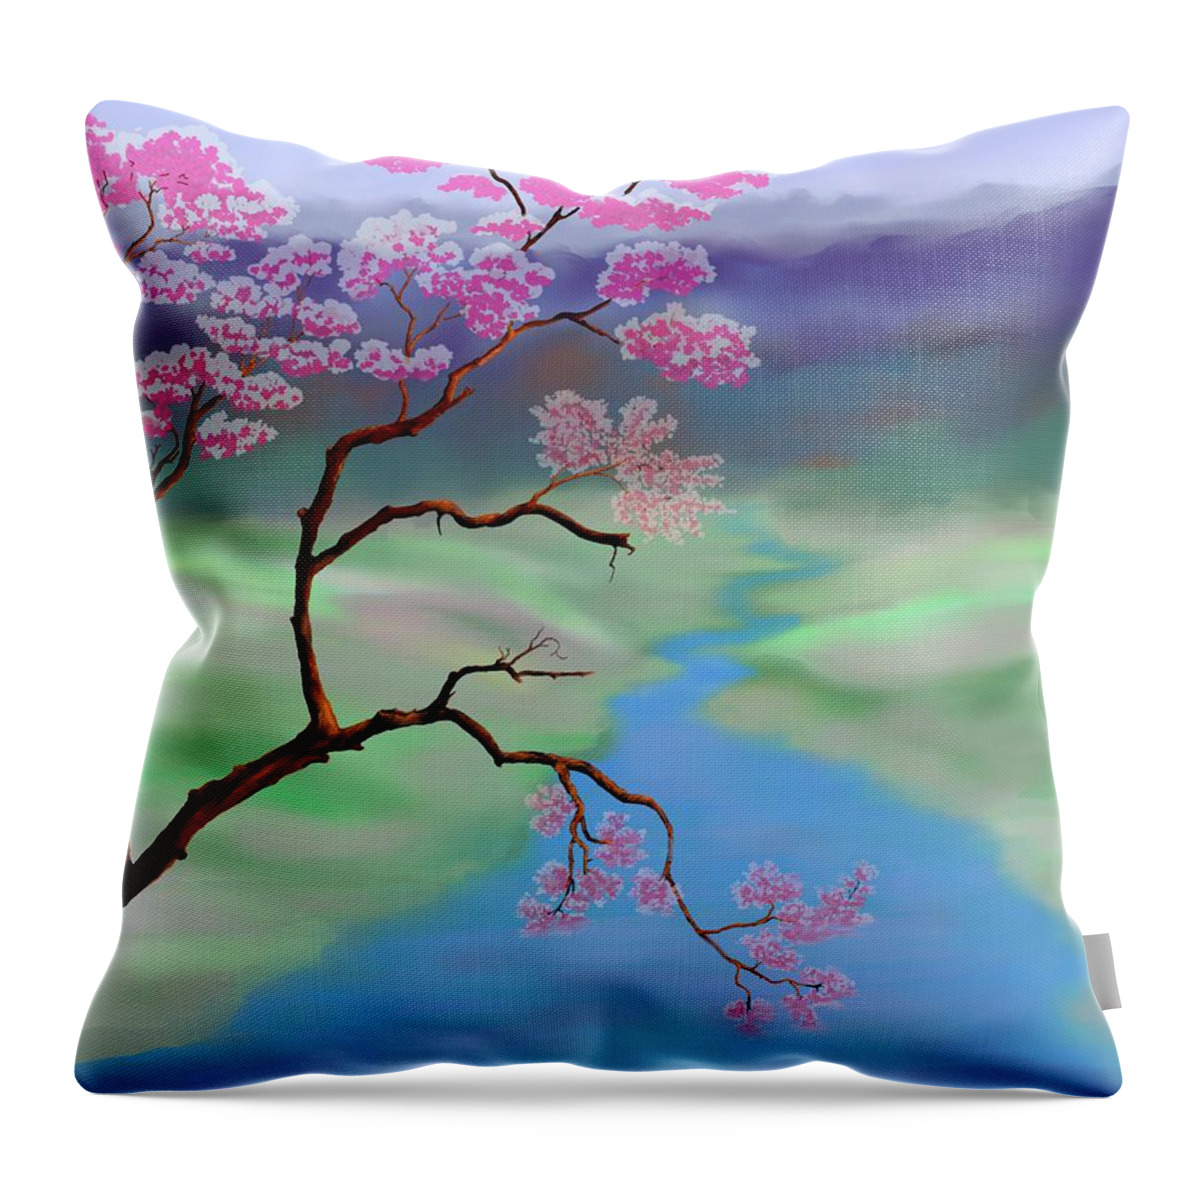 Landscape Throw Pillow featuring the digital art Cherry Blossoms by Marilyn Cullingford